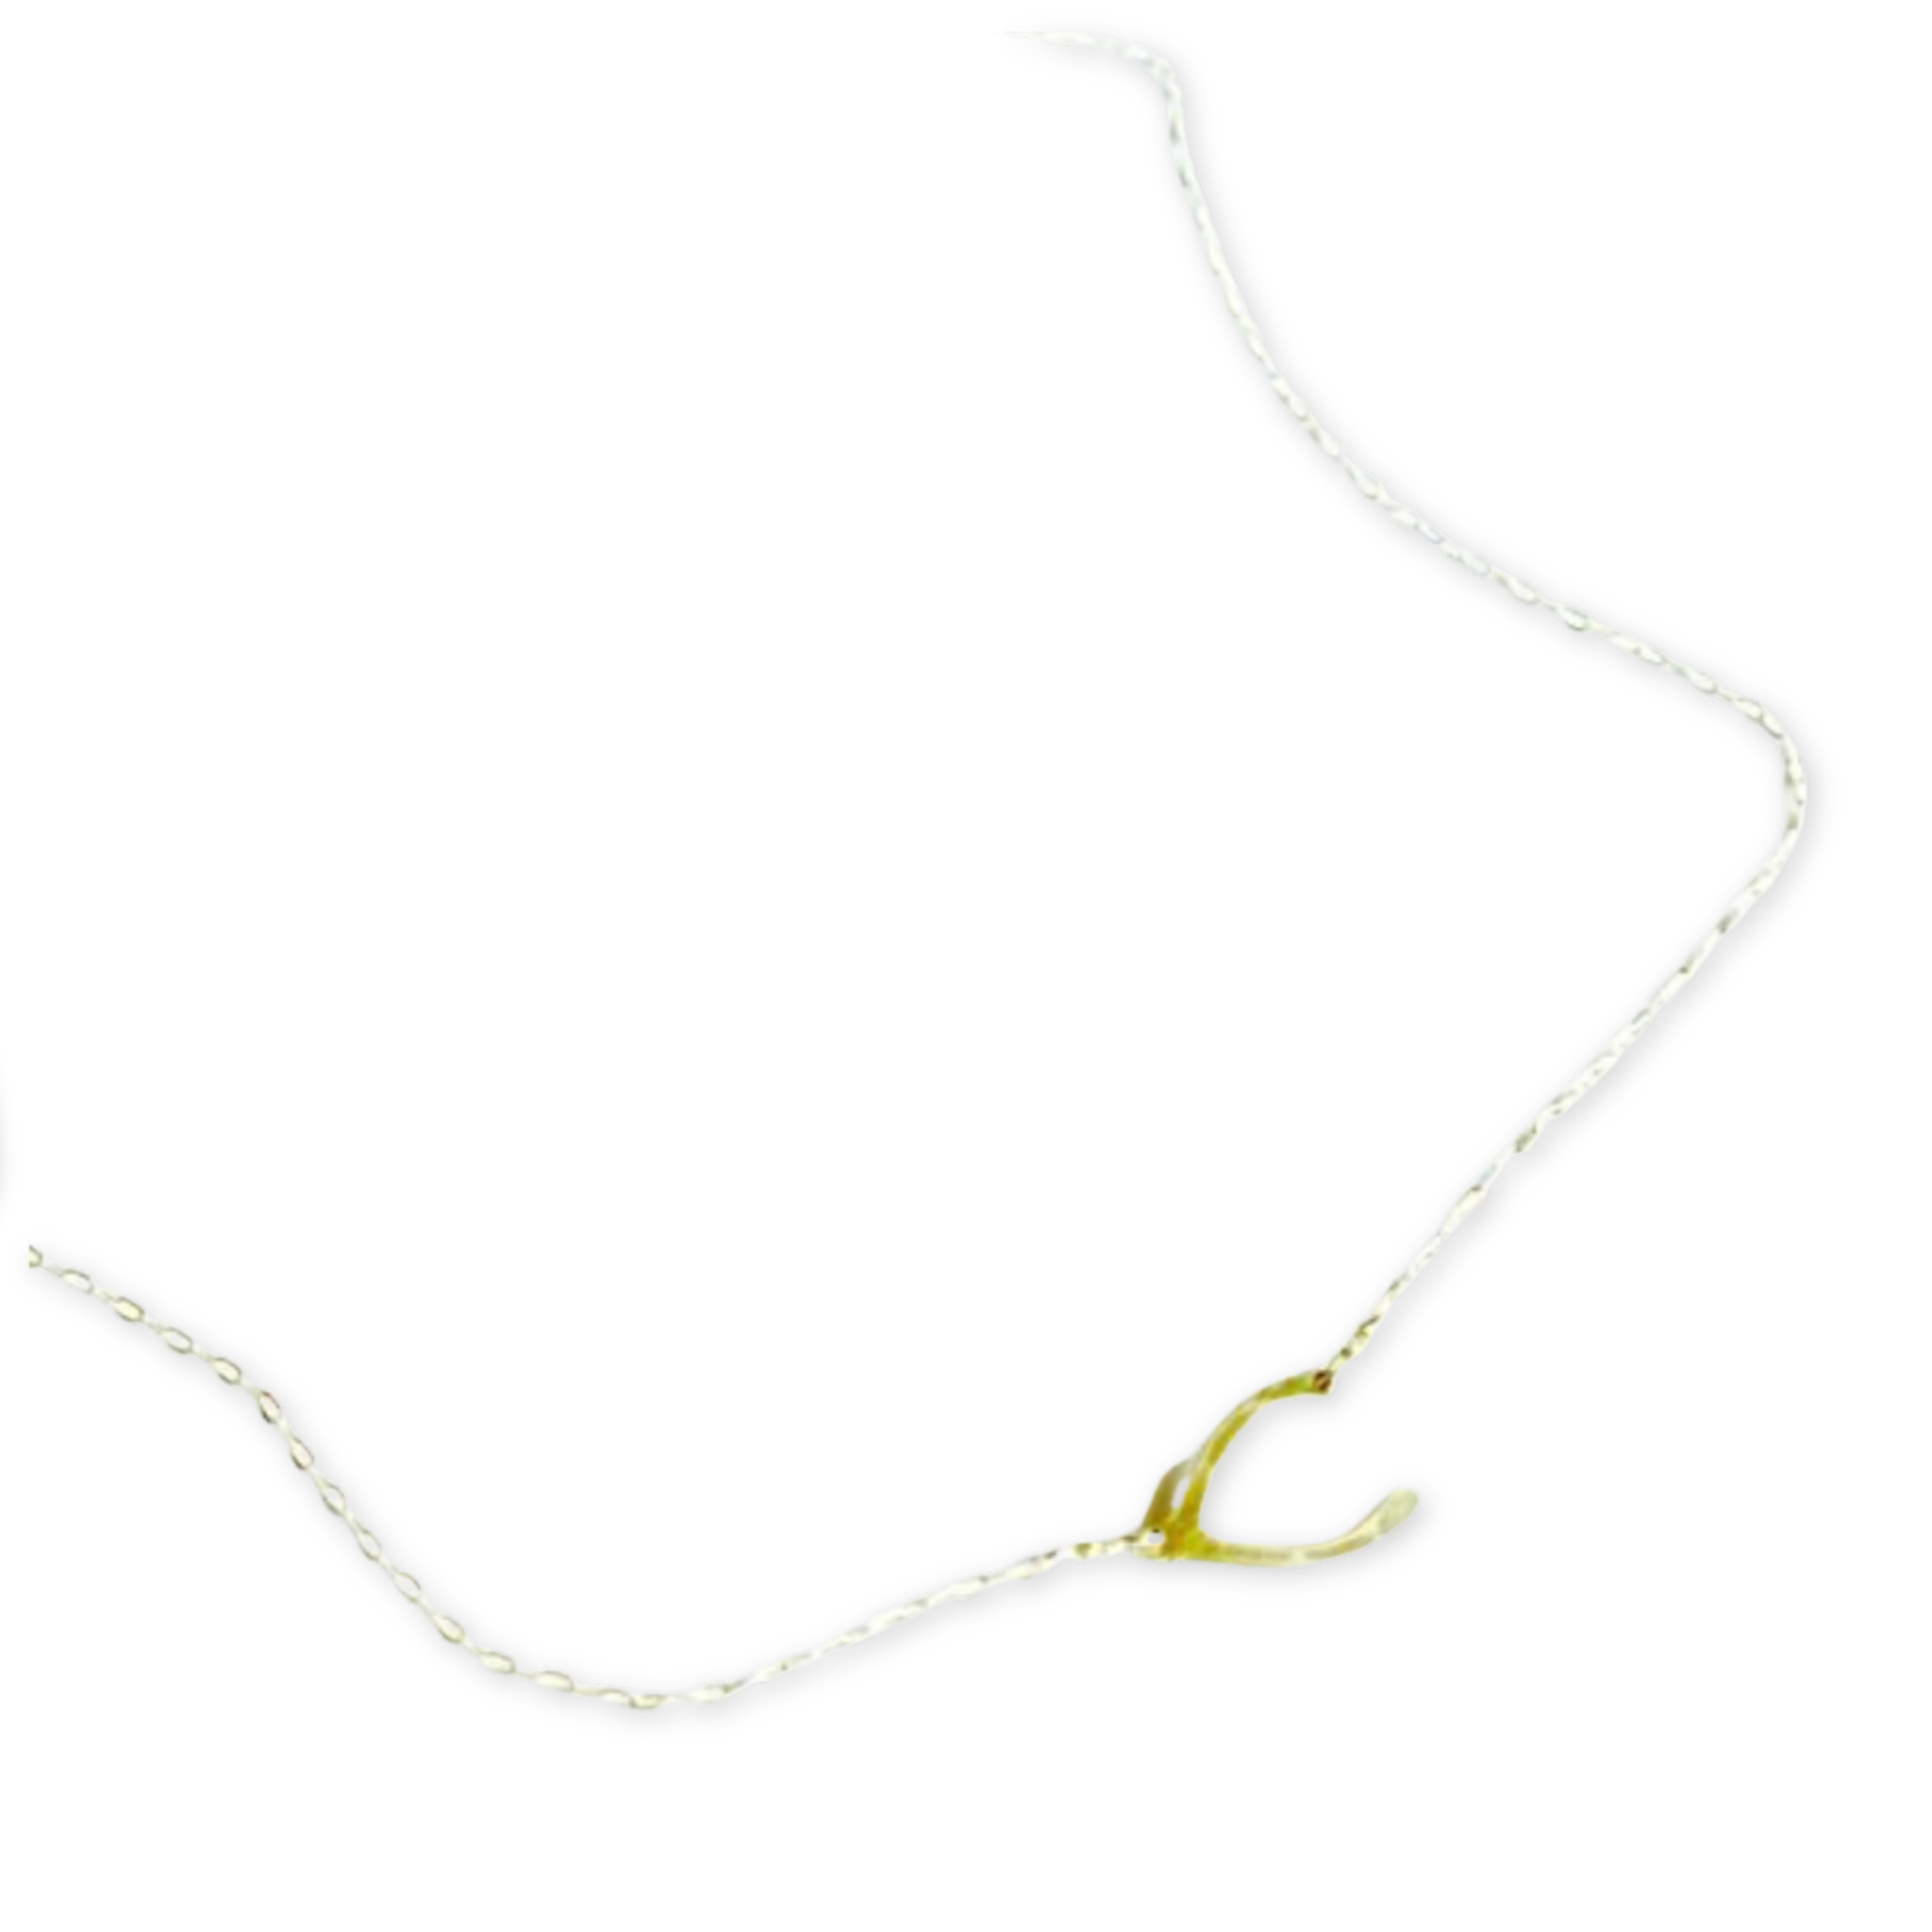 very delicate necklace chain with a tiny wishbone charm